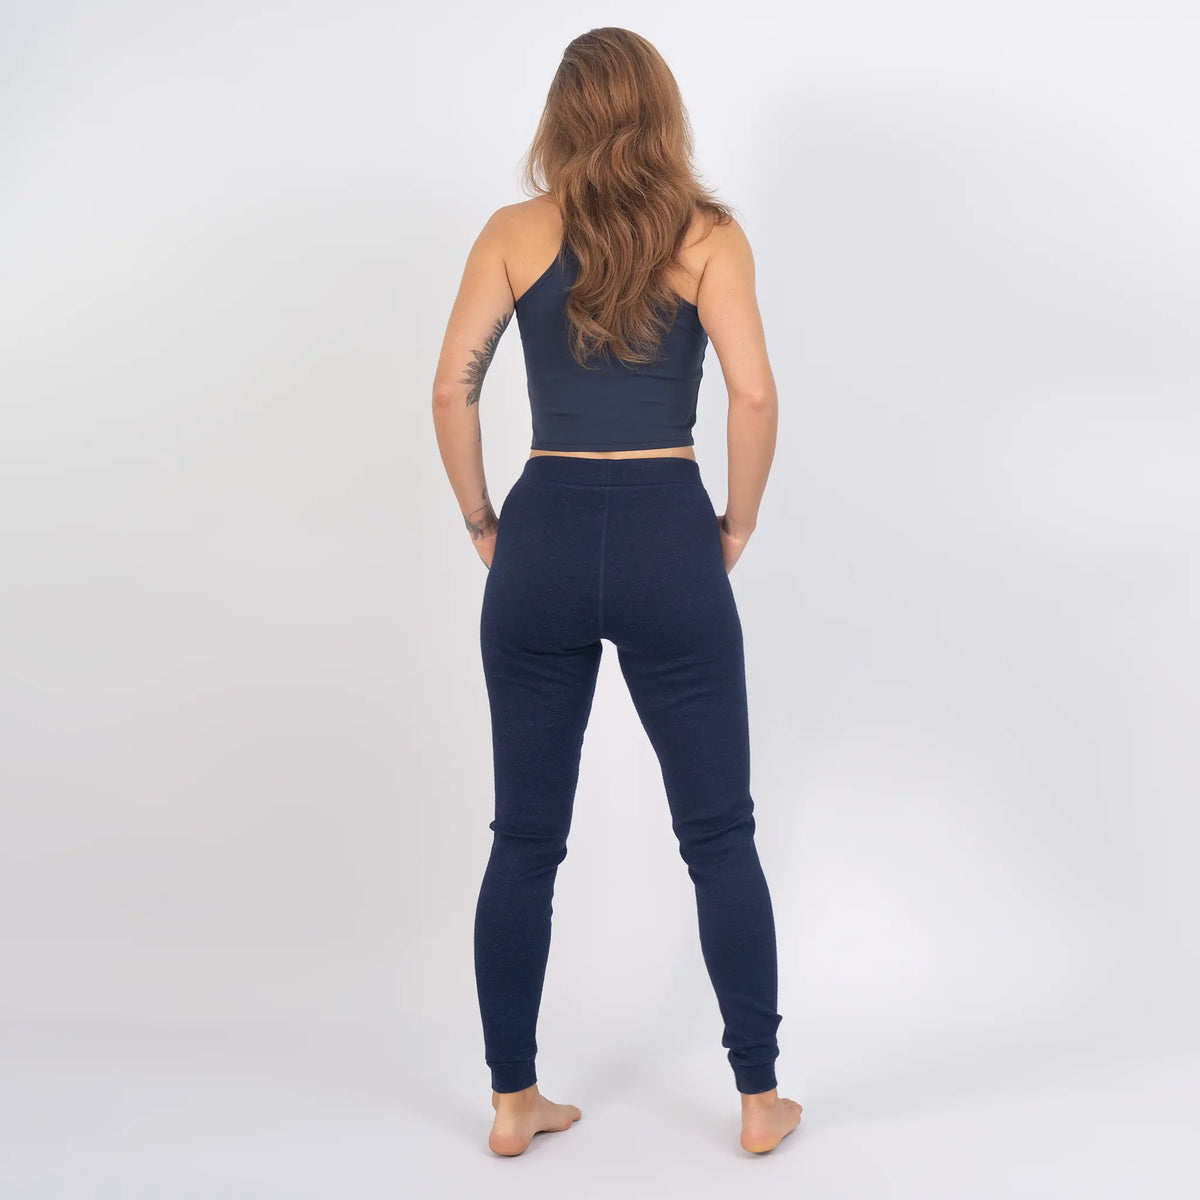 womens sustainable sweatpants color navy blue